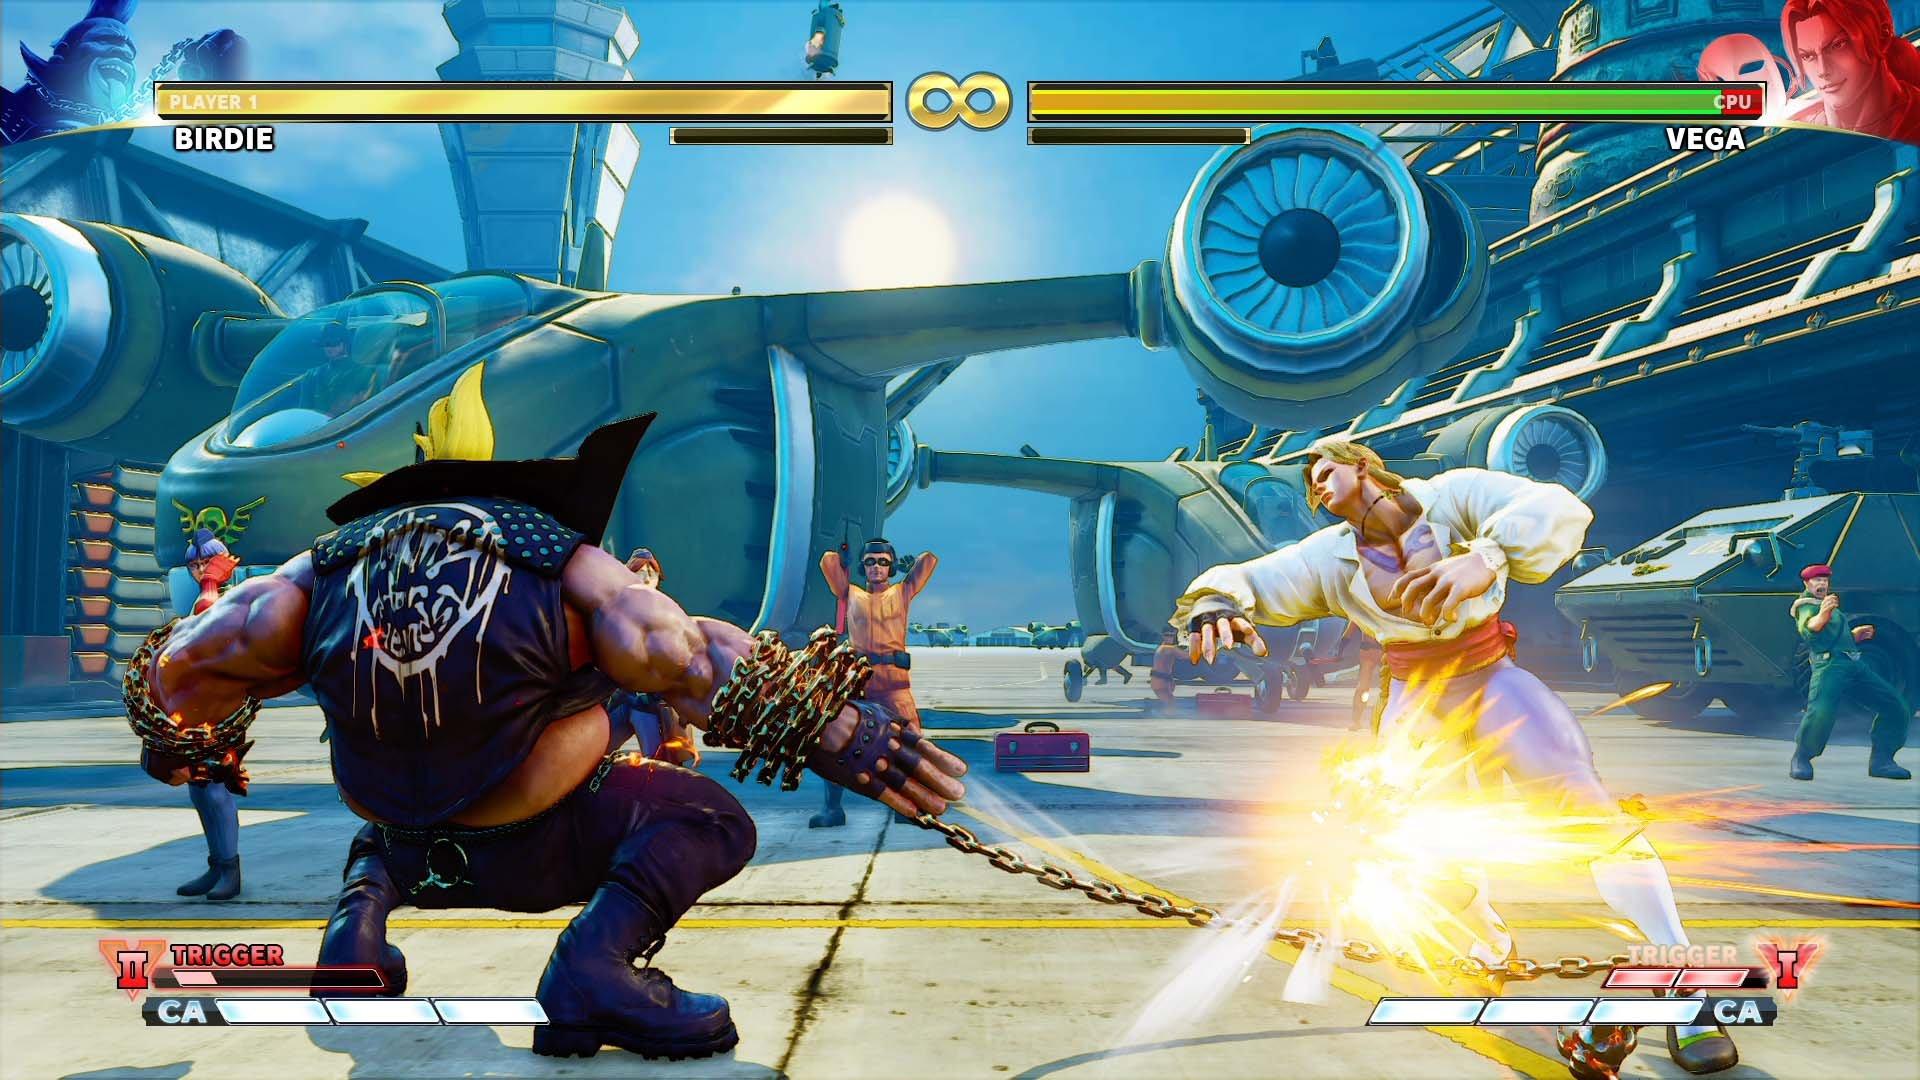 Play Street Fighter 5 free on PS4 and PC next week